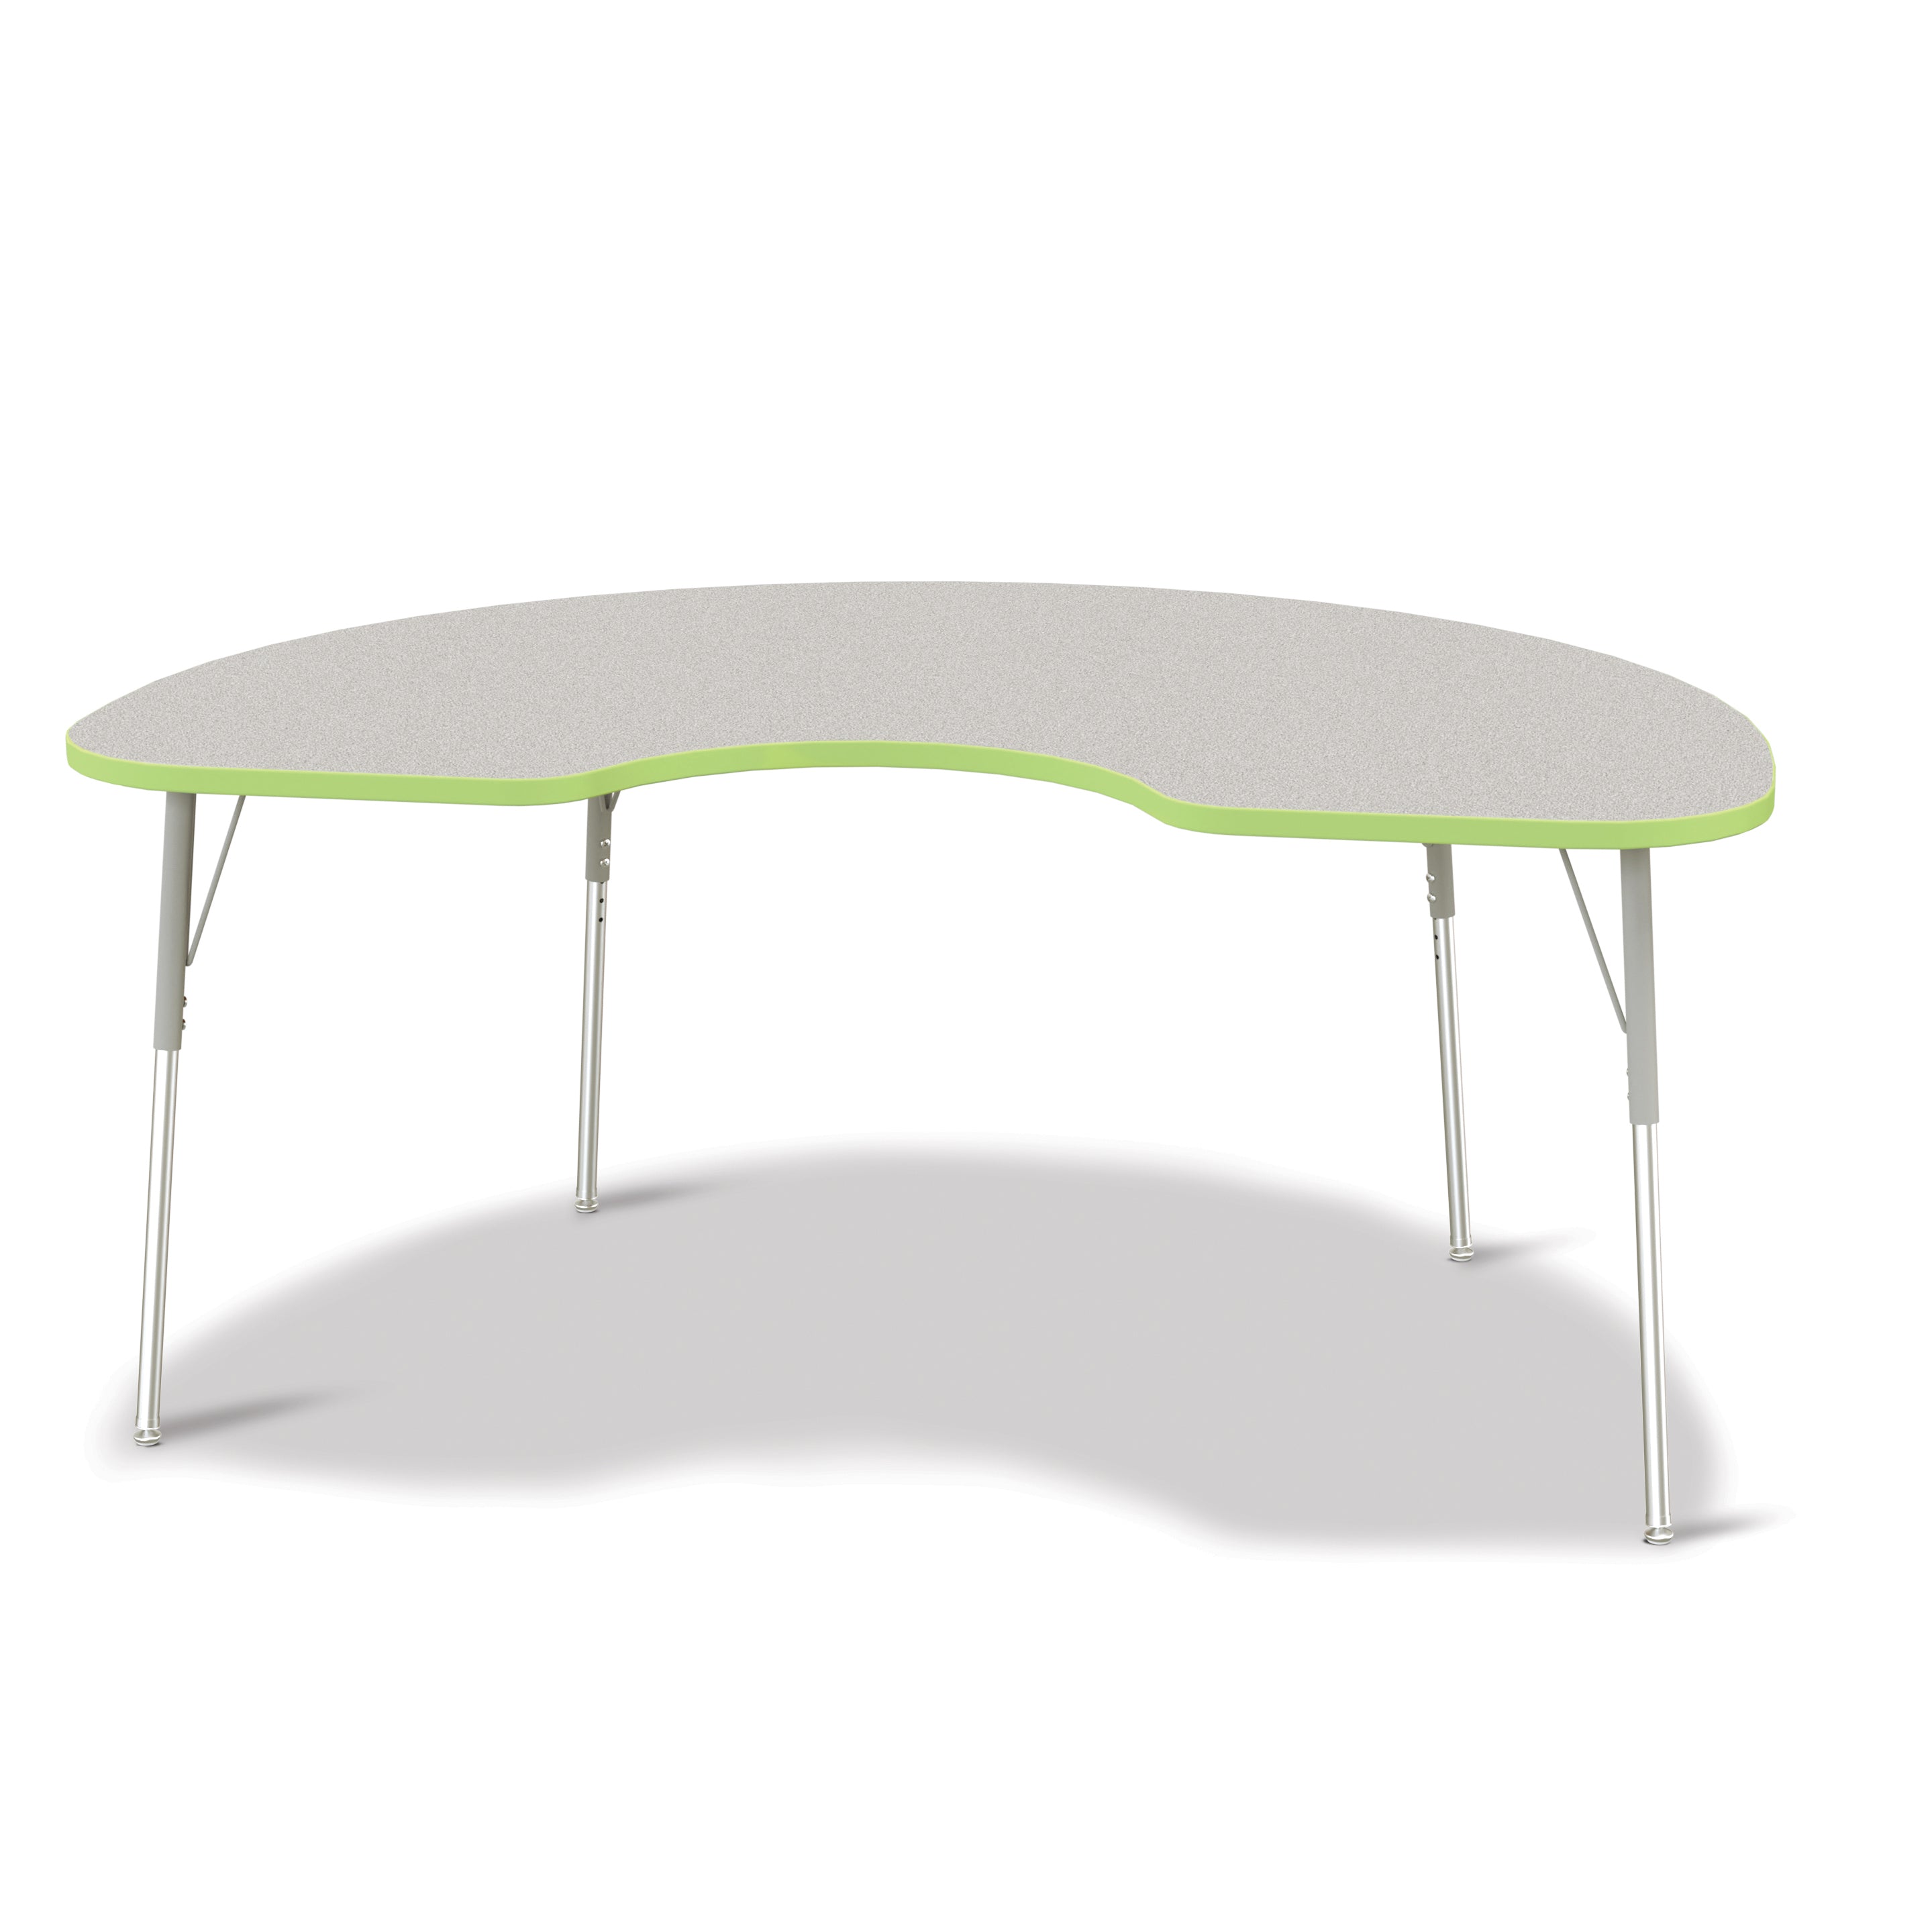 6423JCA130, Berries Kidney Activity Table - 48" X 72", A-height - Freckled Gray/Key Lime/Gray